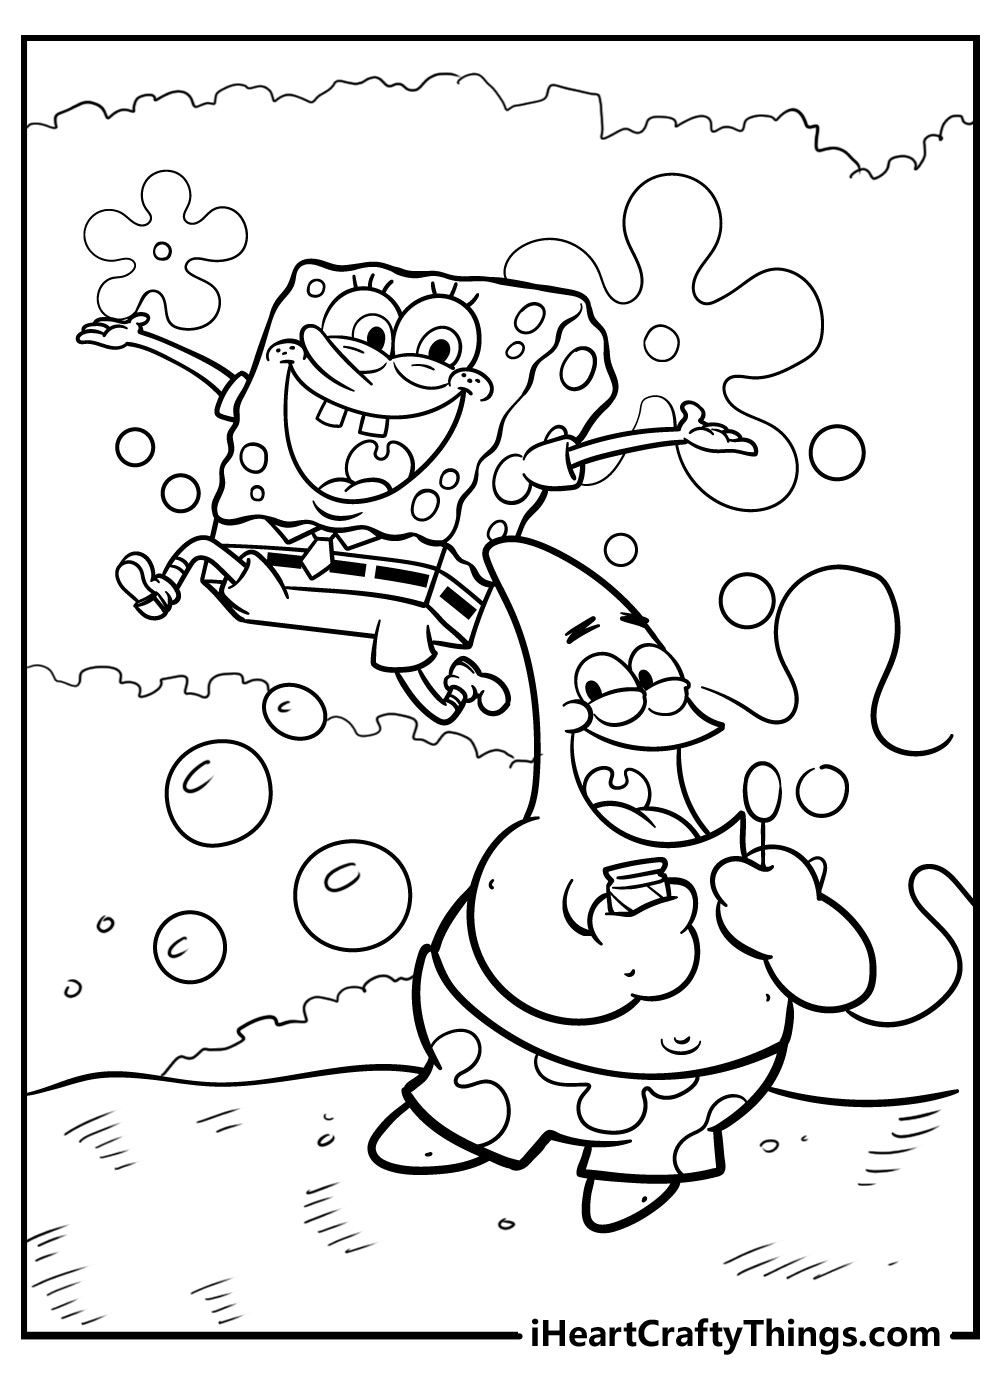 Funny Spongebob Coloring Pages Printables 57